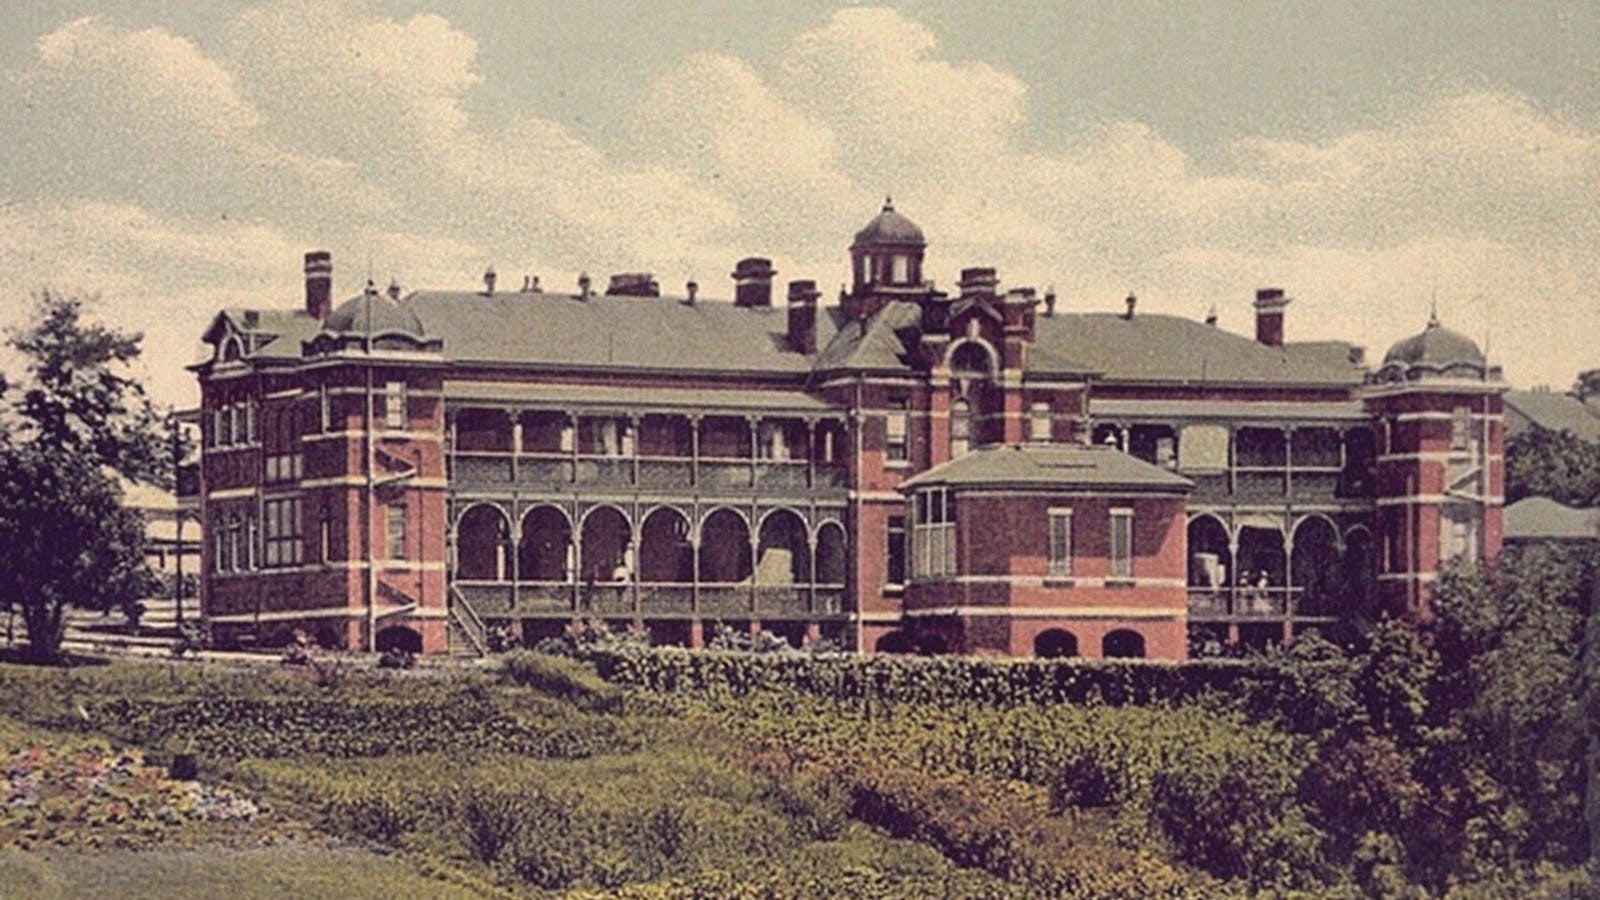 Maitland Hospital, early 20th century. The 1905 building. (Maitland City Library Collection)